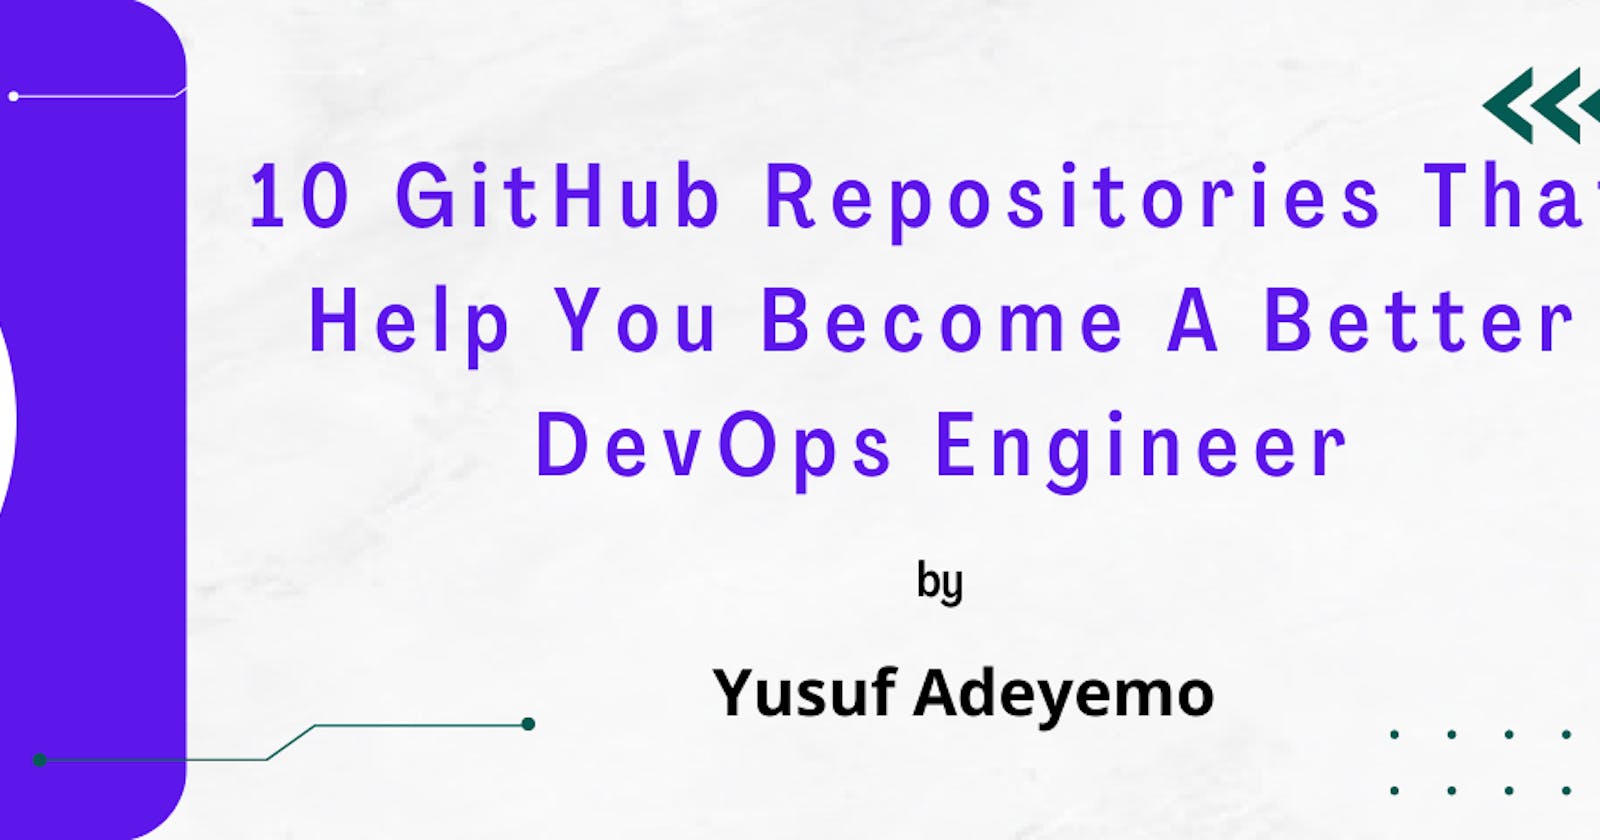 10 GitHub Repositories That Help You Become A Better DevOps Engineer